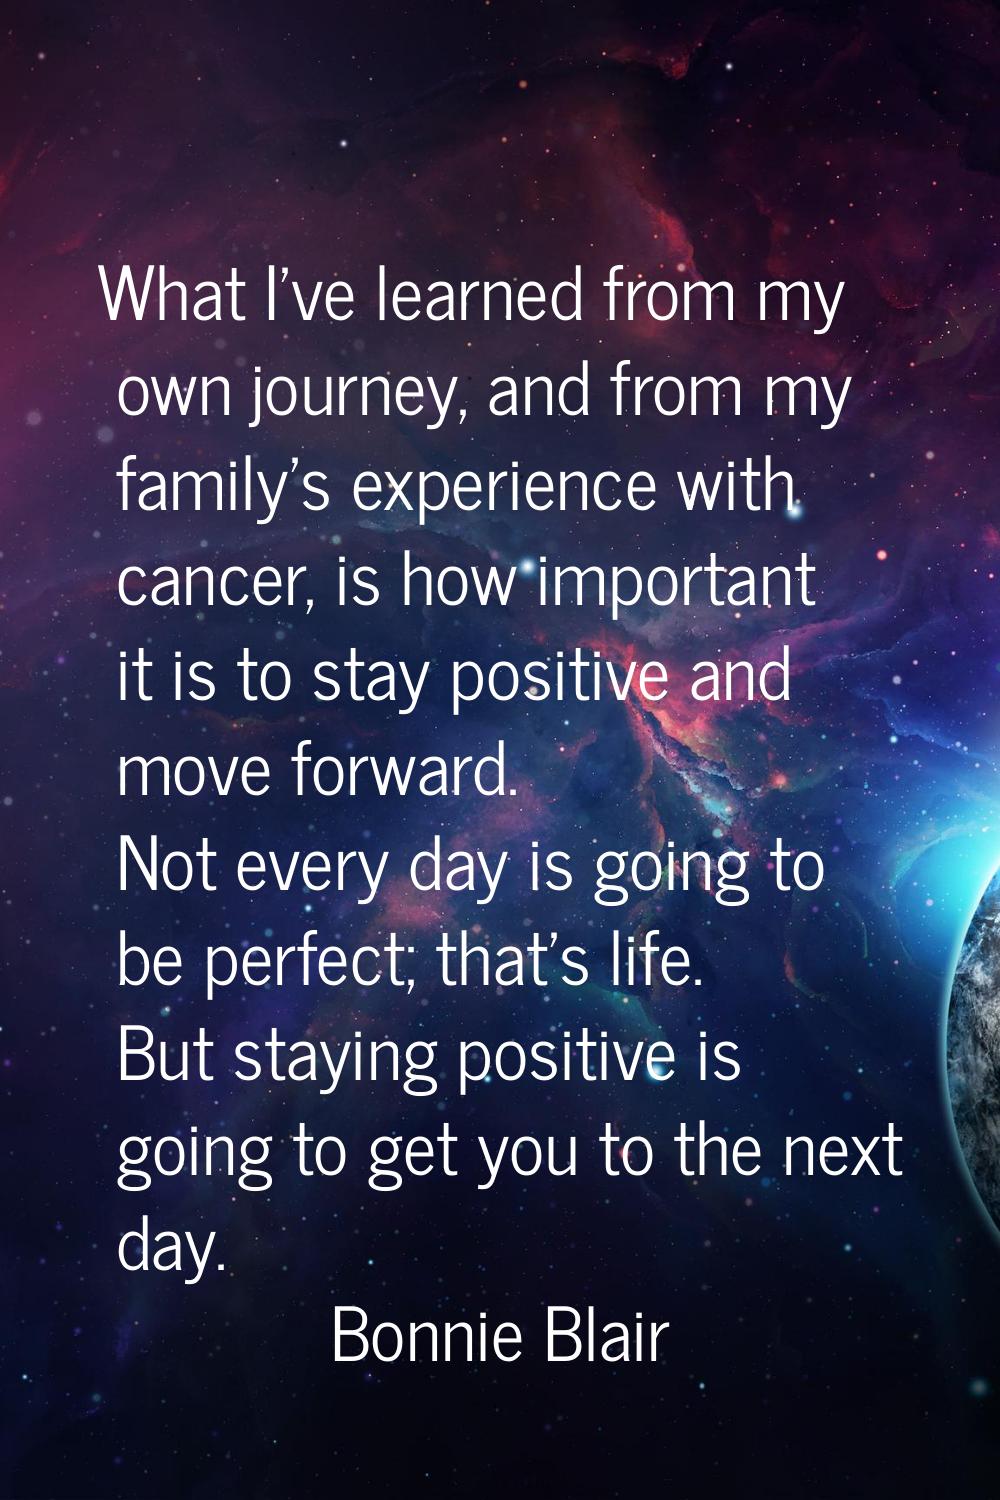 What I've learned from my own journey, and from my family's experience with cancer, is how importan